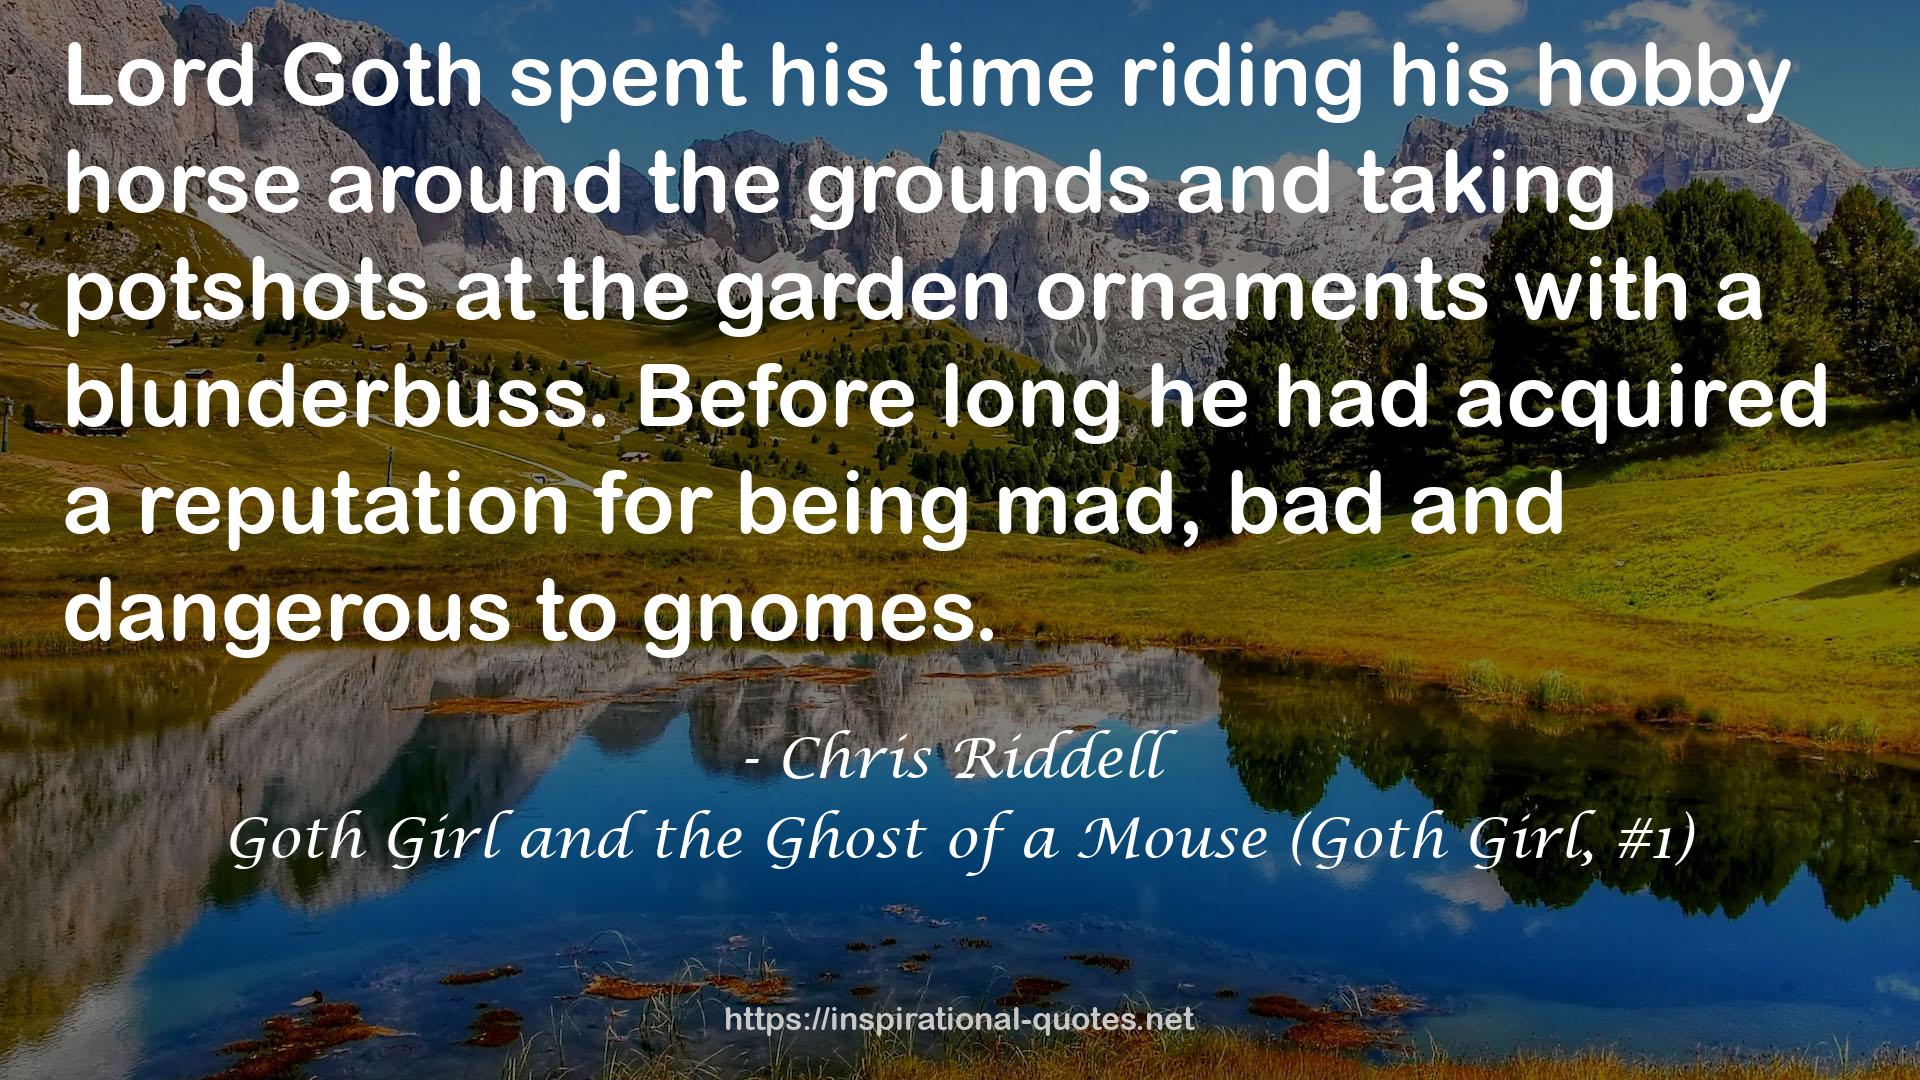 Goth Girl and the Ghost of a Mouse (Goth Girl, #1) QUOTES